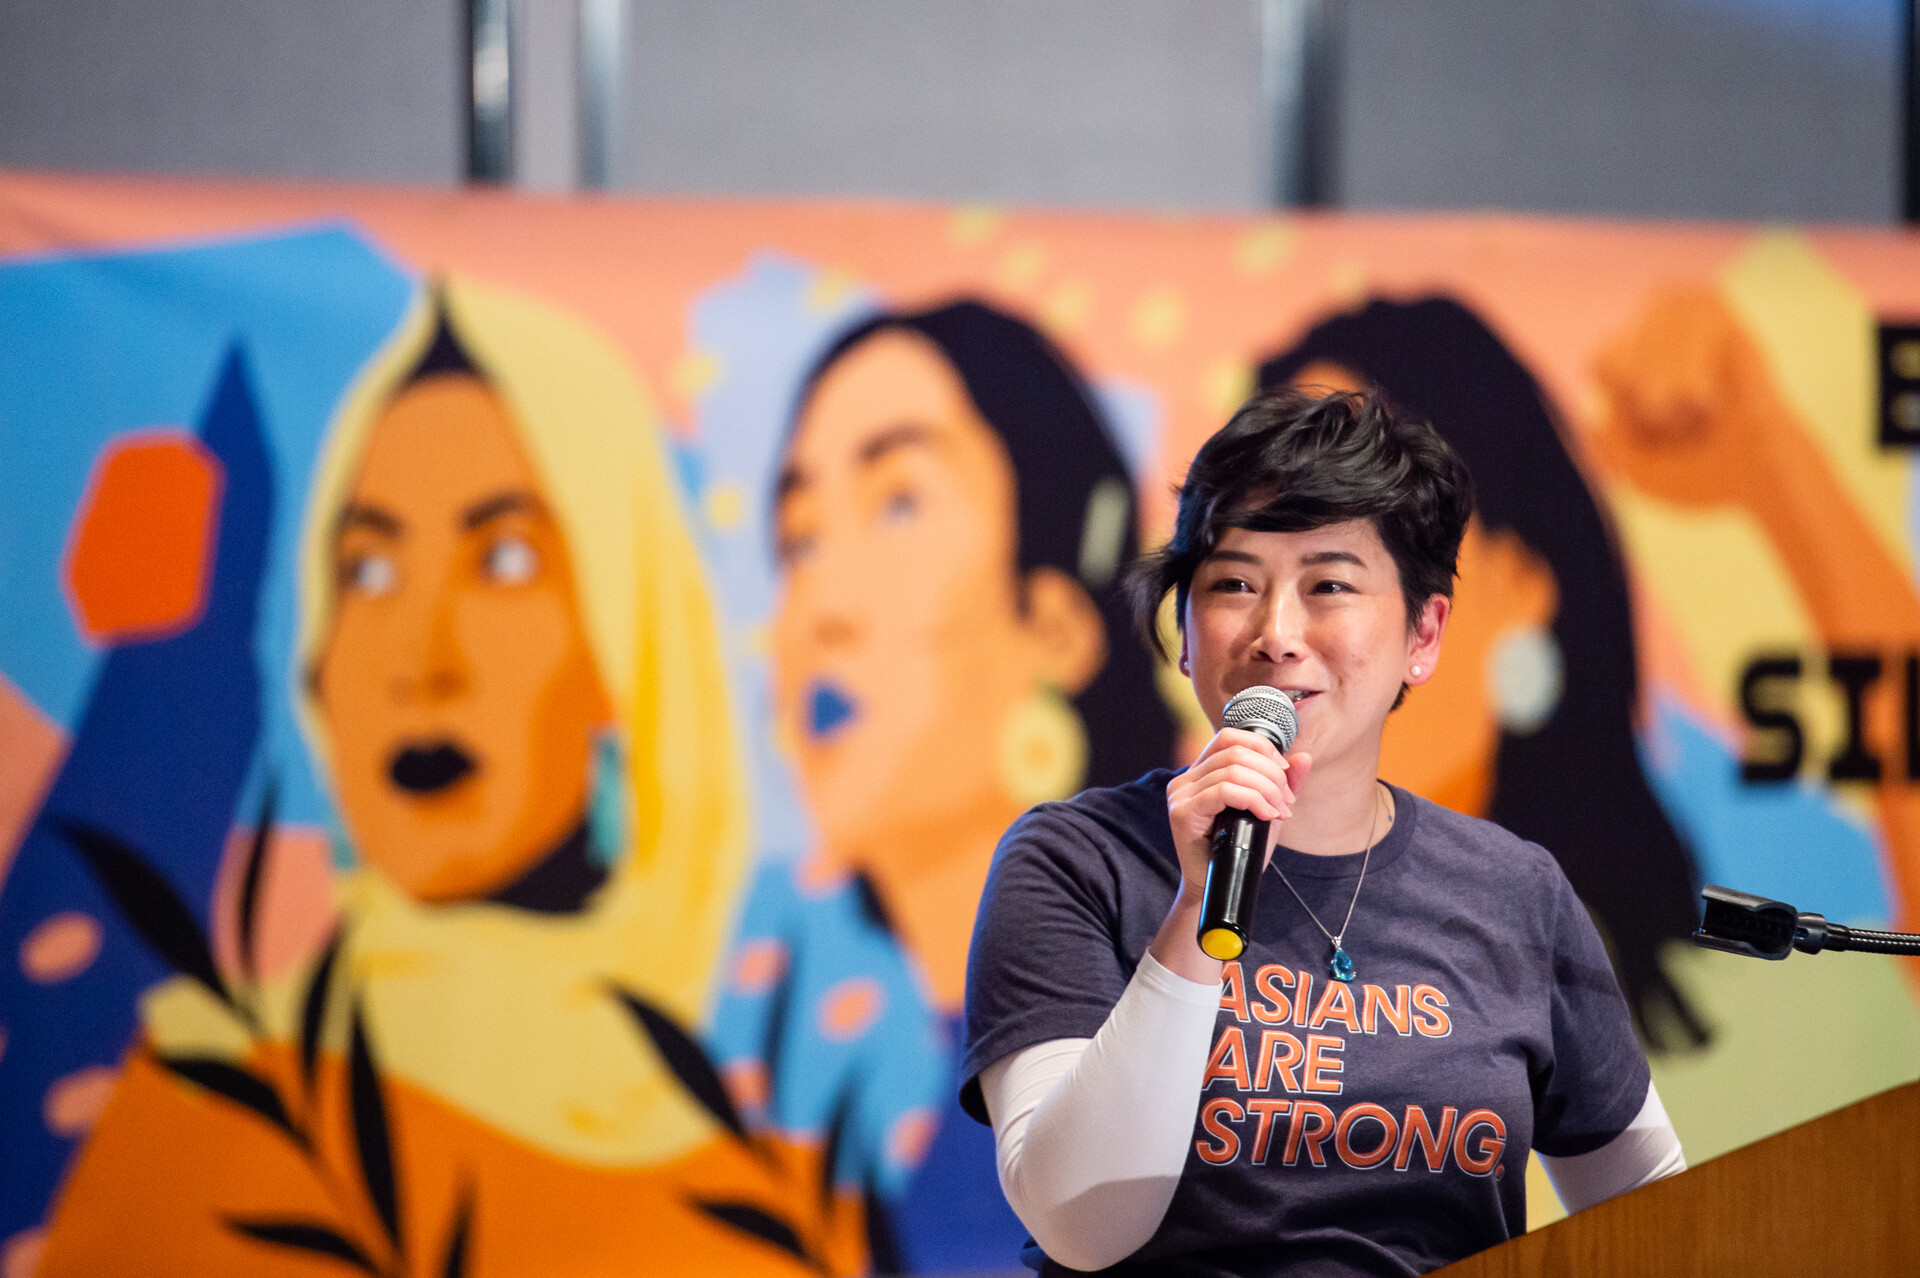 woman with 'asians are strong' t-shirt speaks at microphone with mural of strong female asian faces in background